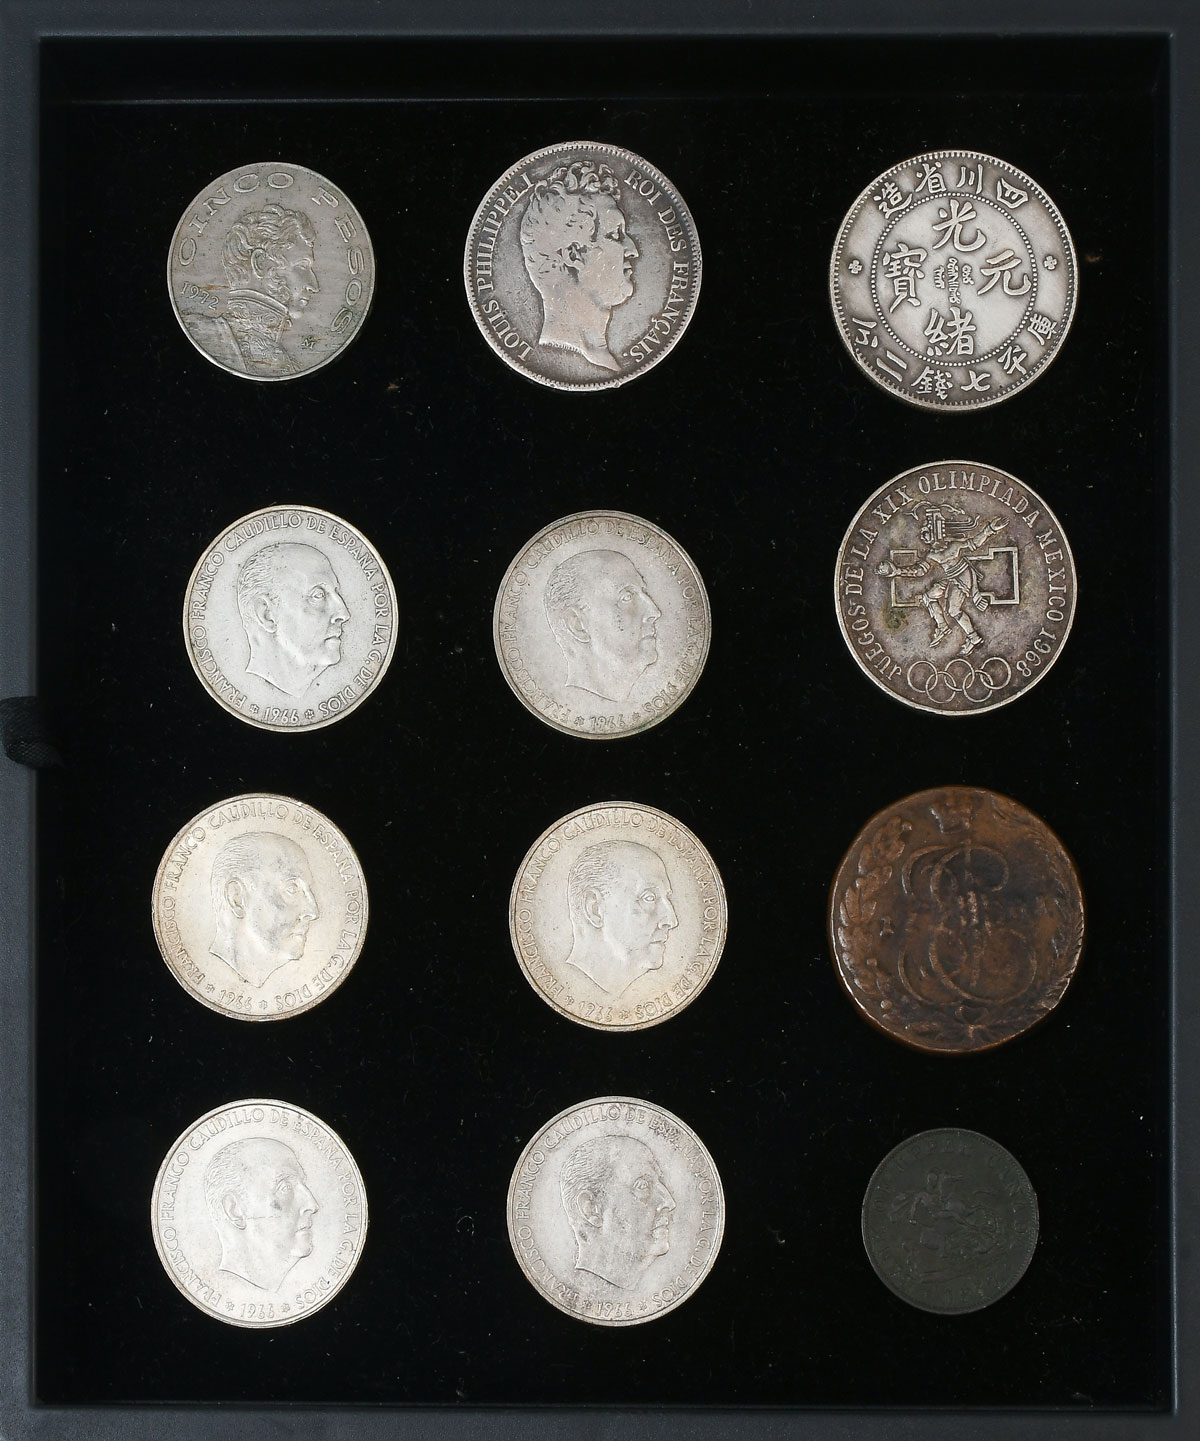 12 PC WORLDLY COIN COLLECTION  27599f